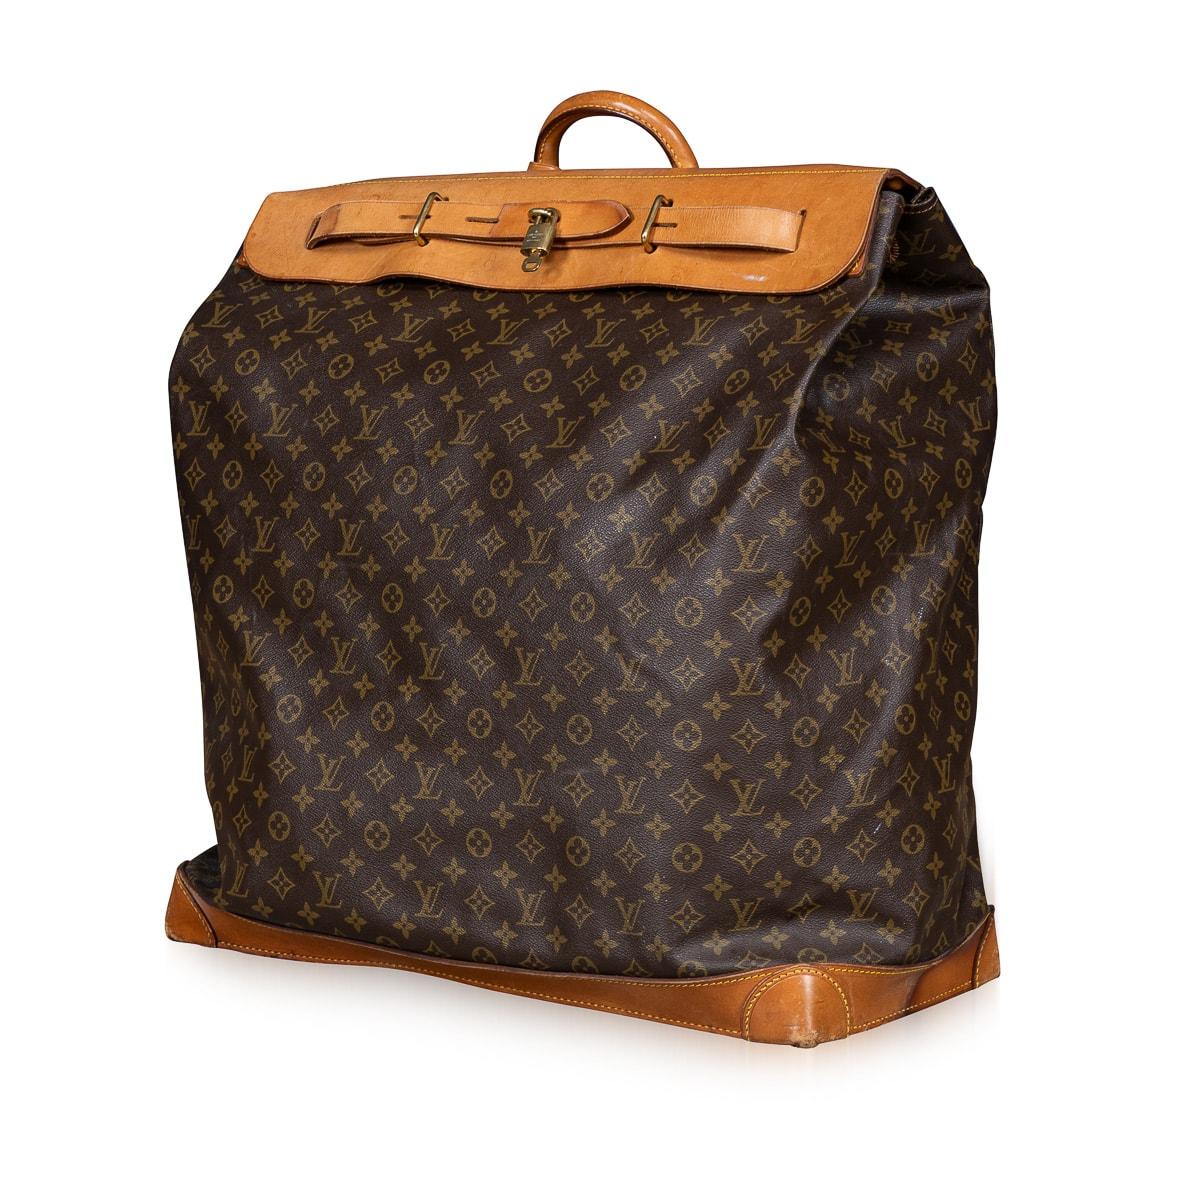 A 20th Century Louis Vuitton steamer travel bag, crafted from monogram canvas and natural tan leather, serves as a quintessential representation of the brand's unwavering commitment to a design seamlessly harmonising style and utility. Inspired by